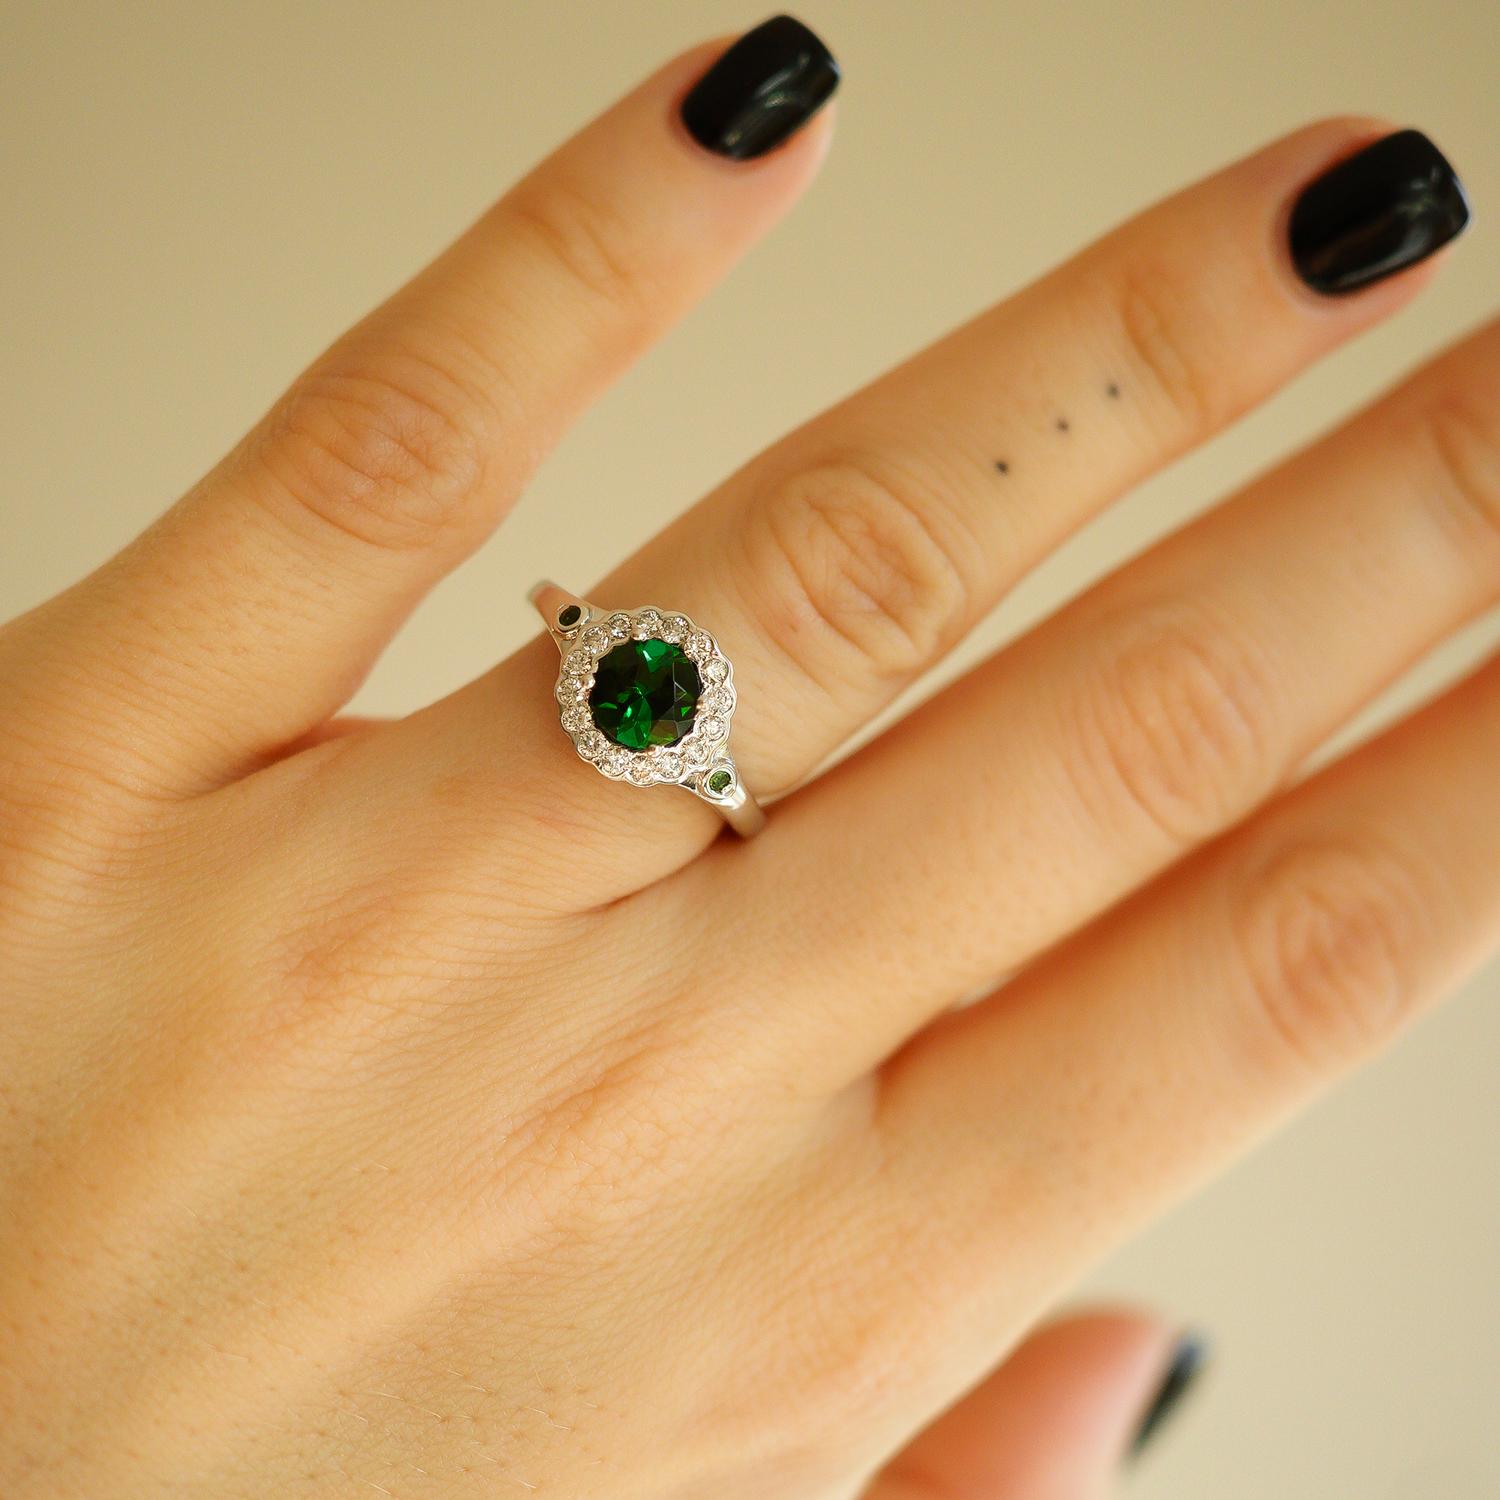 For Sale:  10k White Gold 1ct Natural Green Tourmaline & Diamond '.28t.c.w' Halo Ring 7